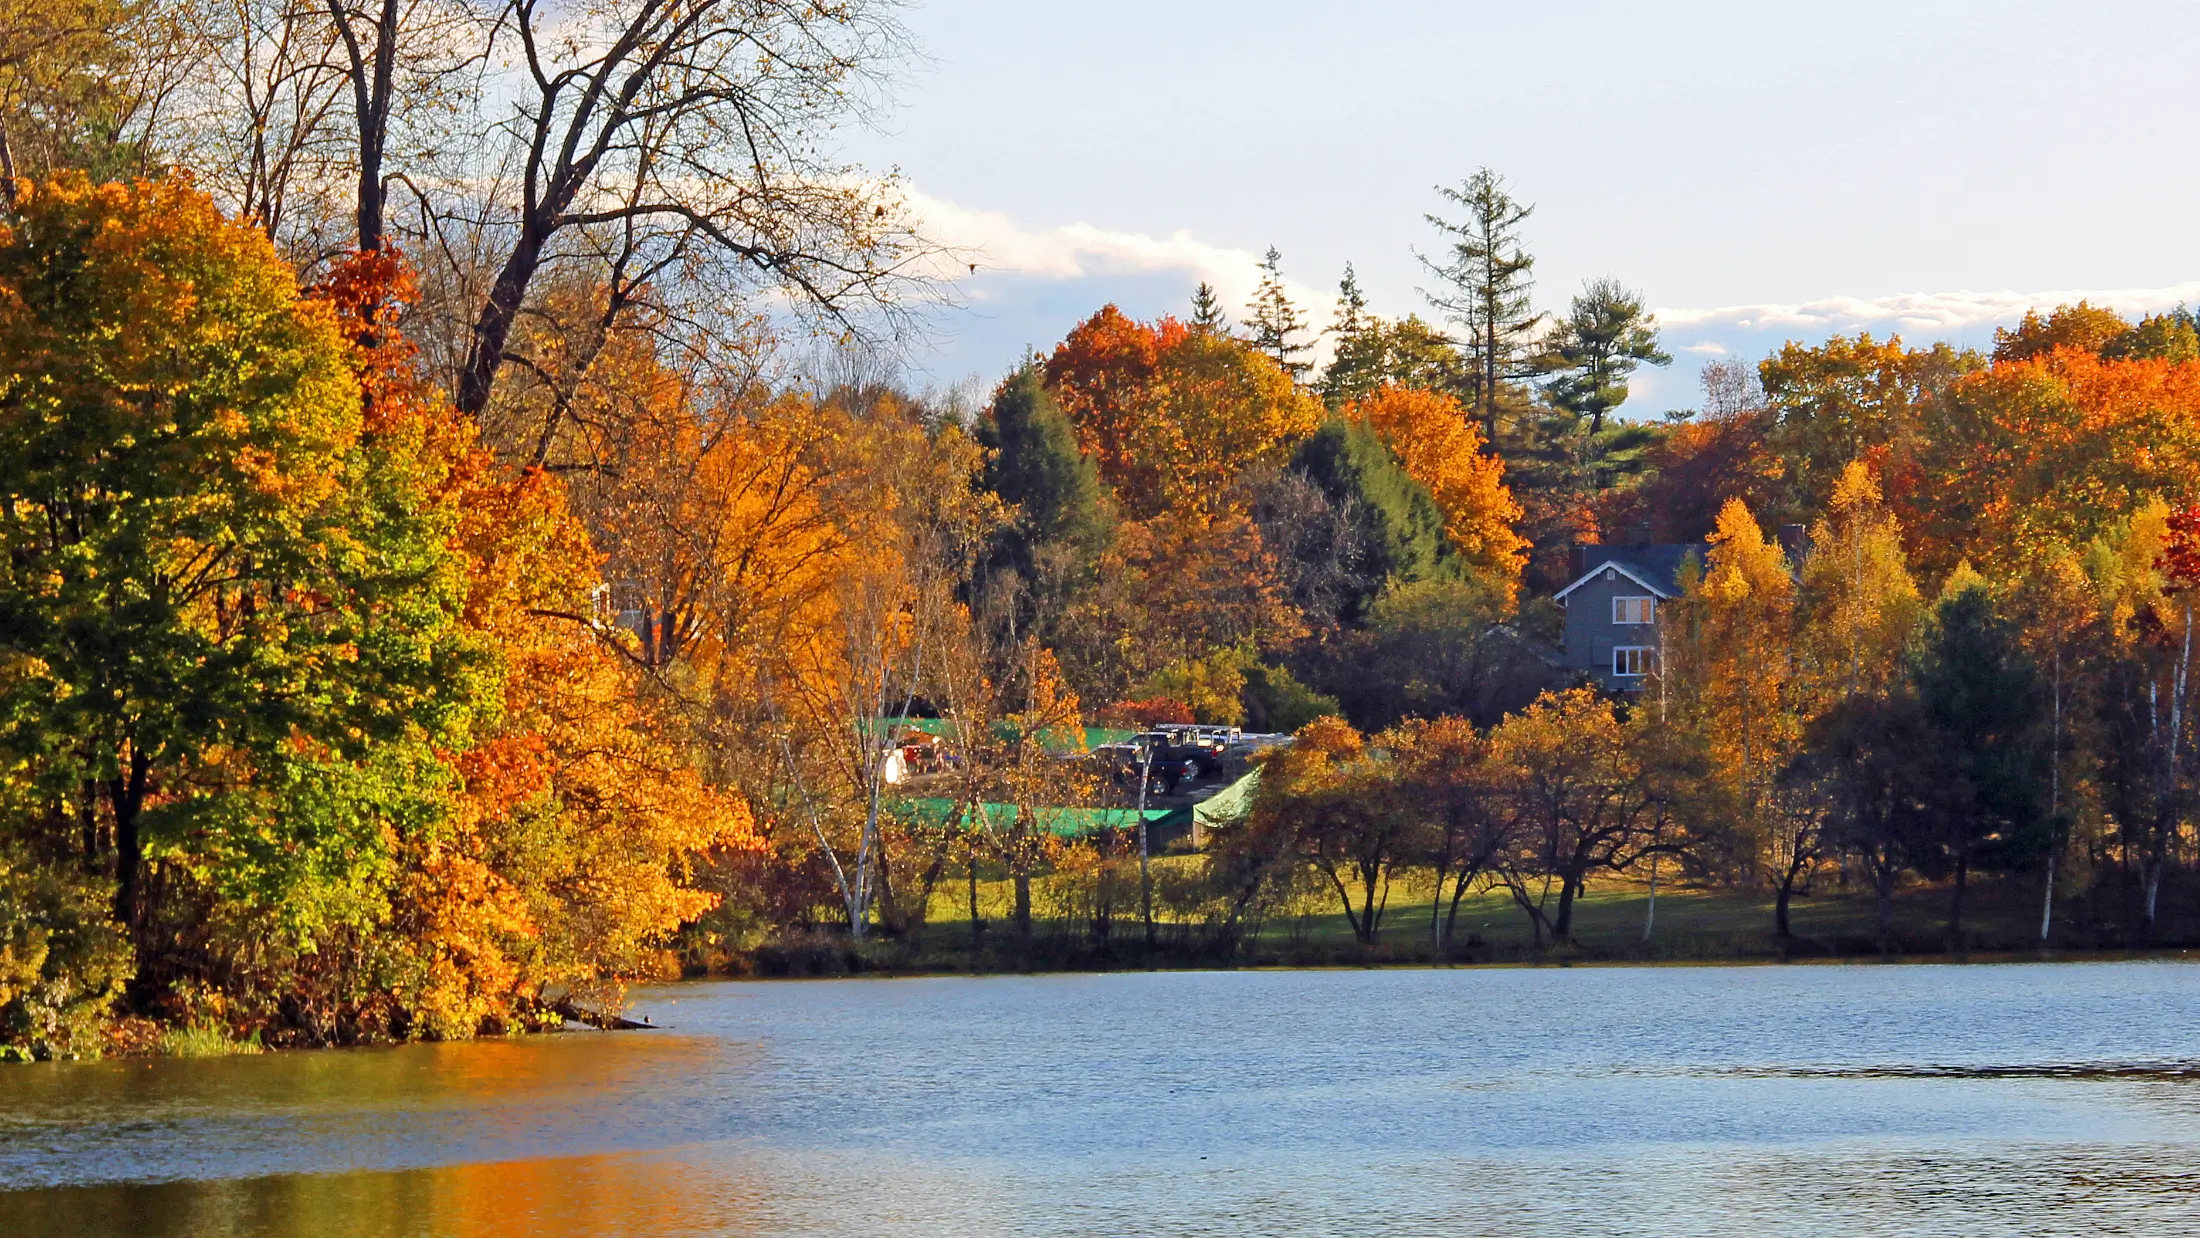 Colorful trees of autumn surround the water in greater Hanover, New Hampshire.